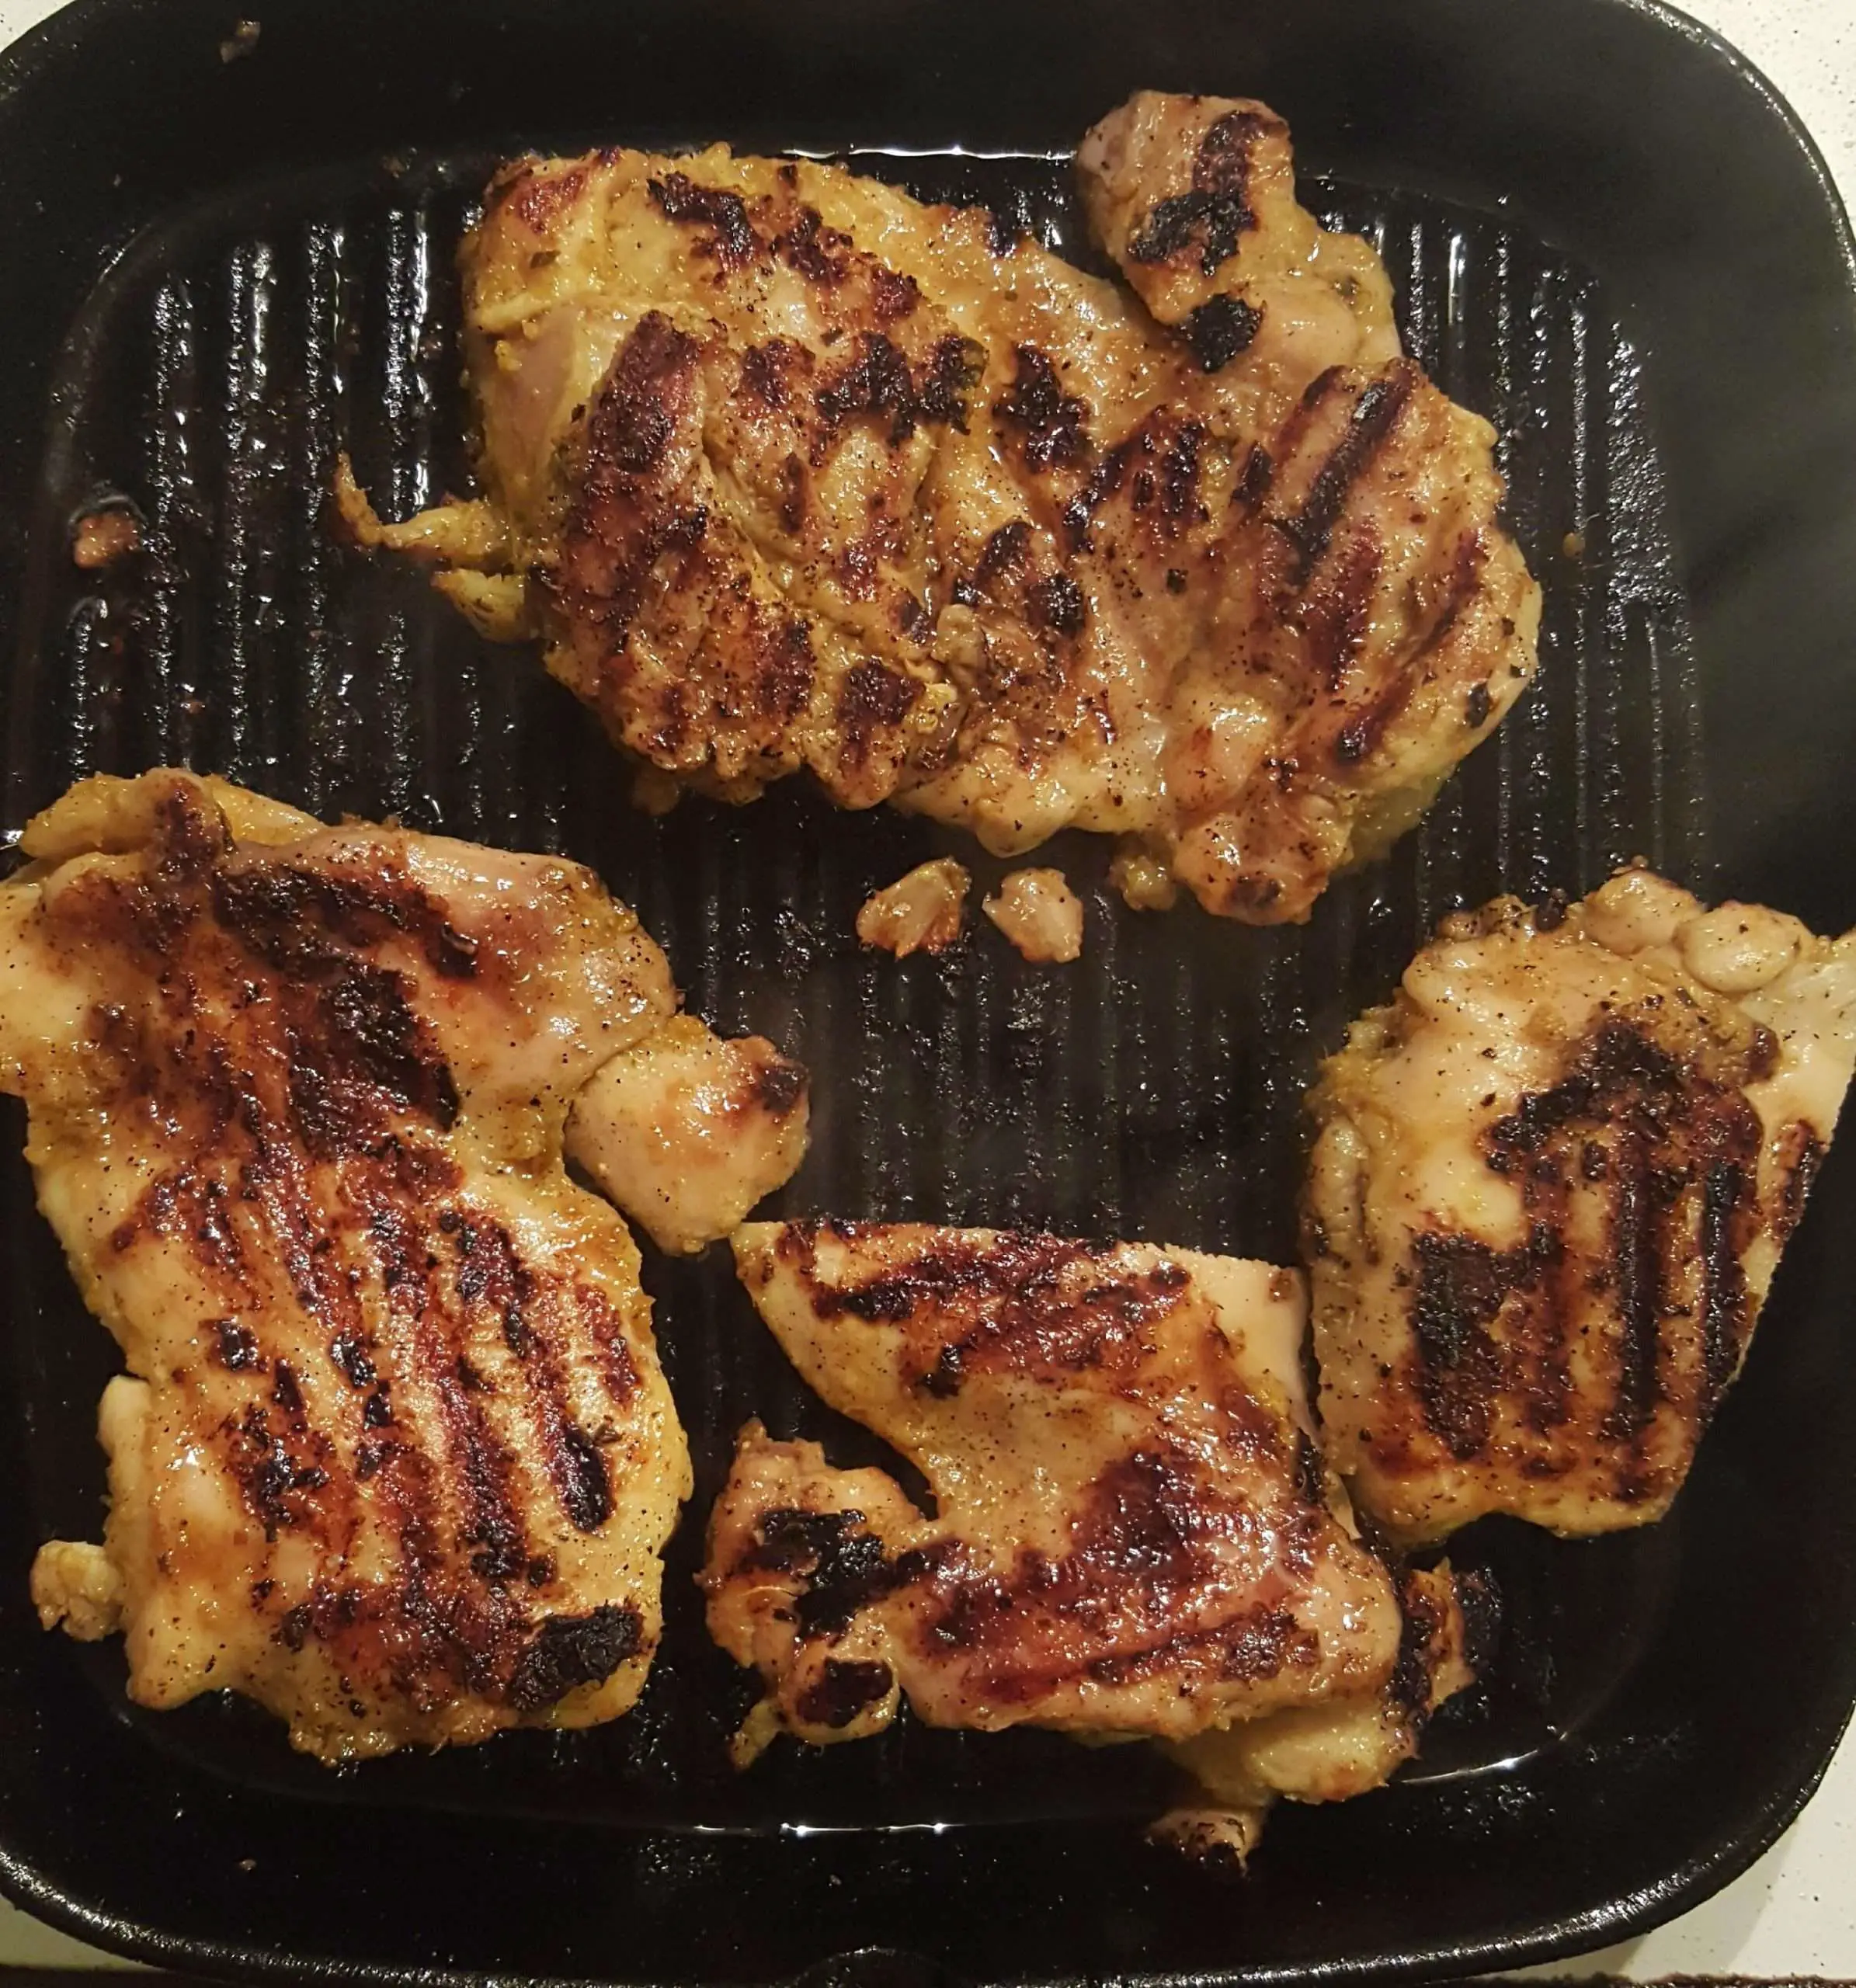 [Homemade] Grilled Chicken for tonight